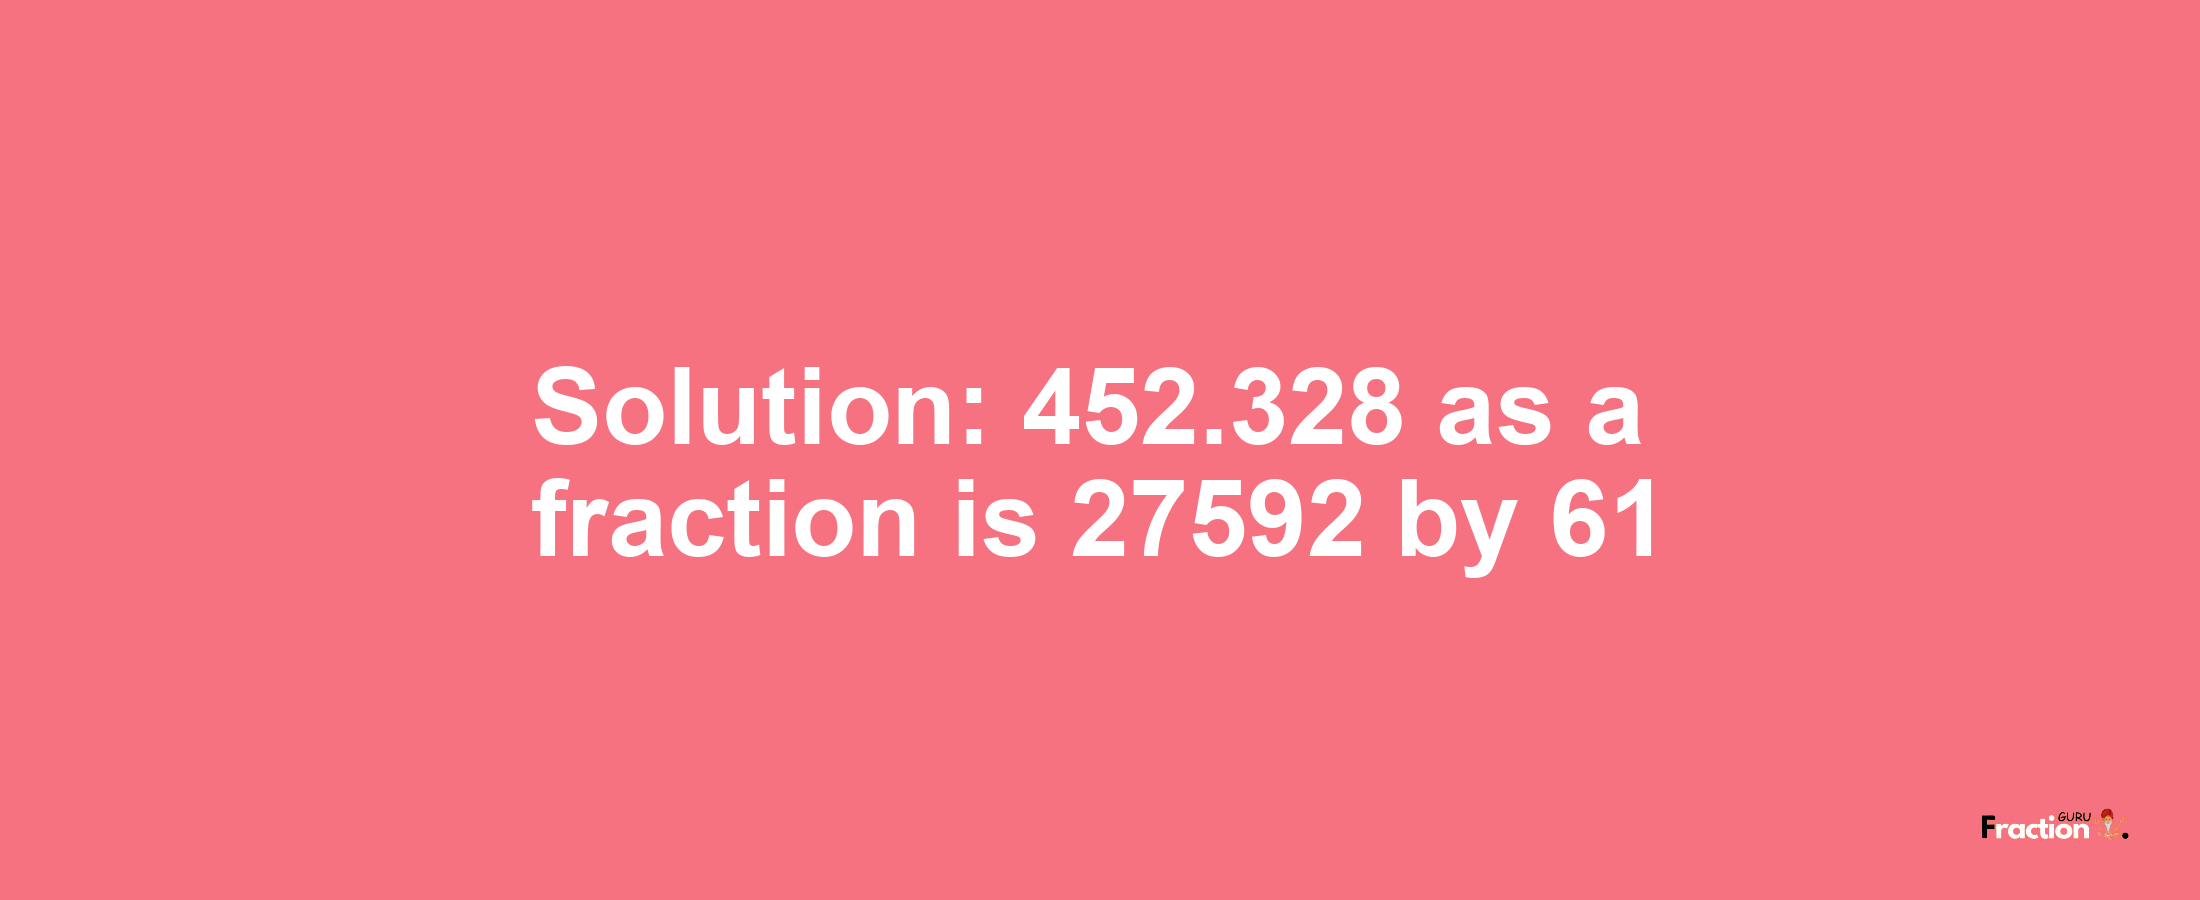 Solution:452.328 as a fraction is 27592/61